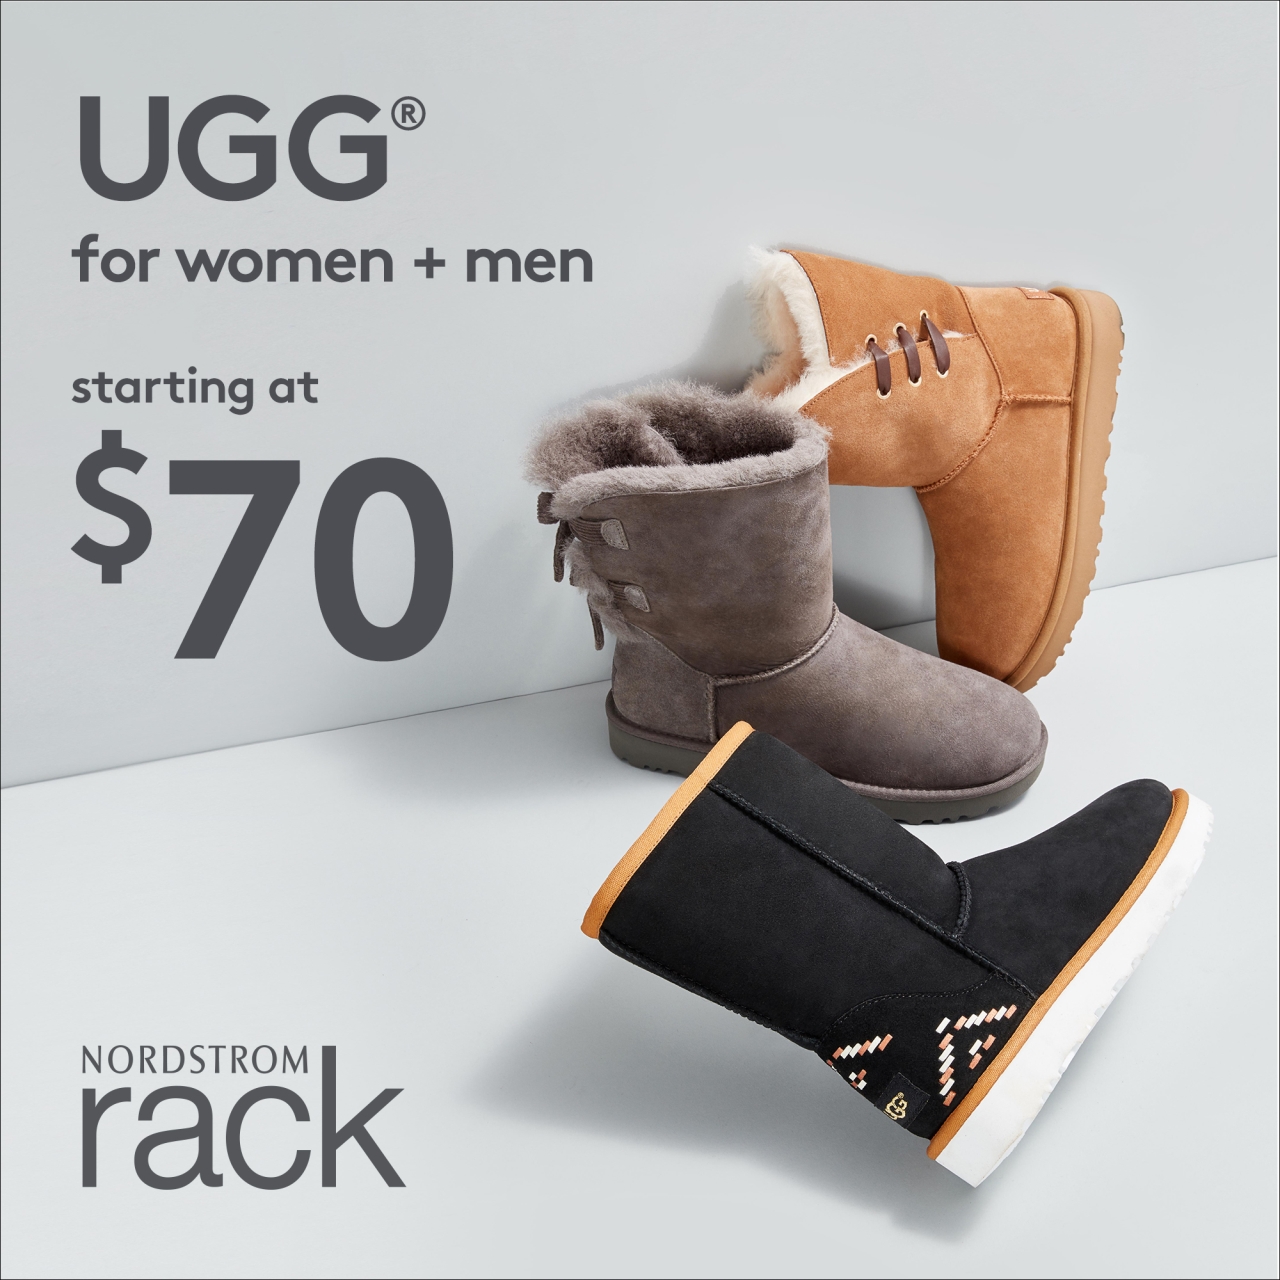 stores now at Nordstrom Rack! - Destiny USA